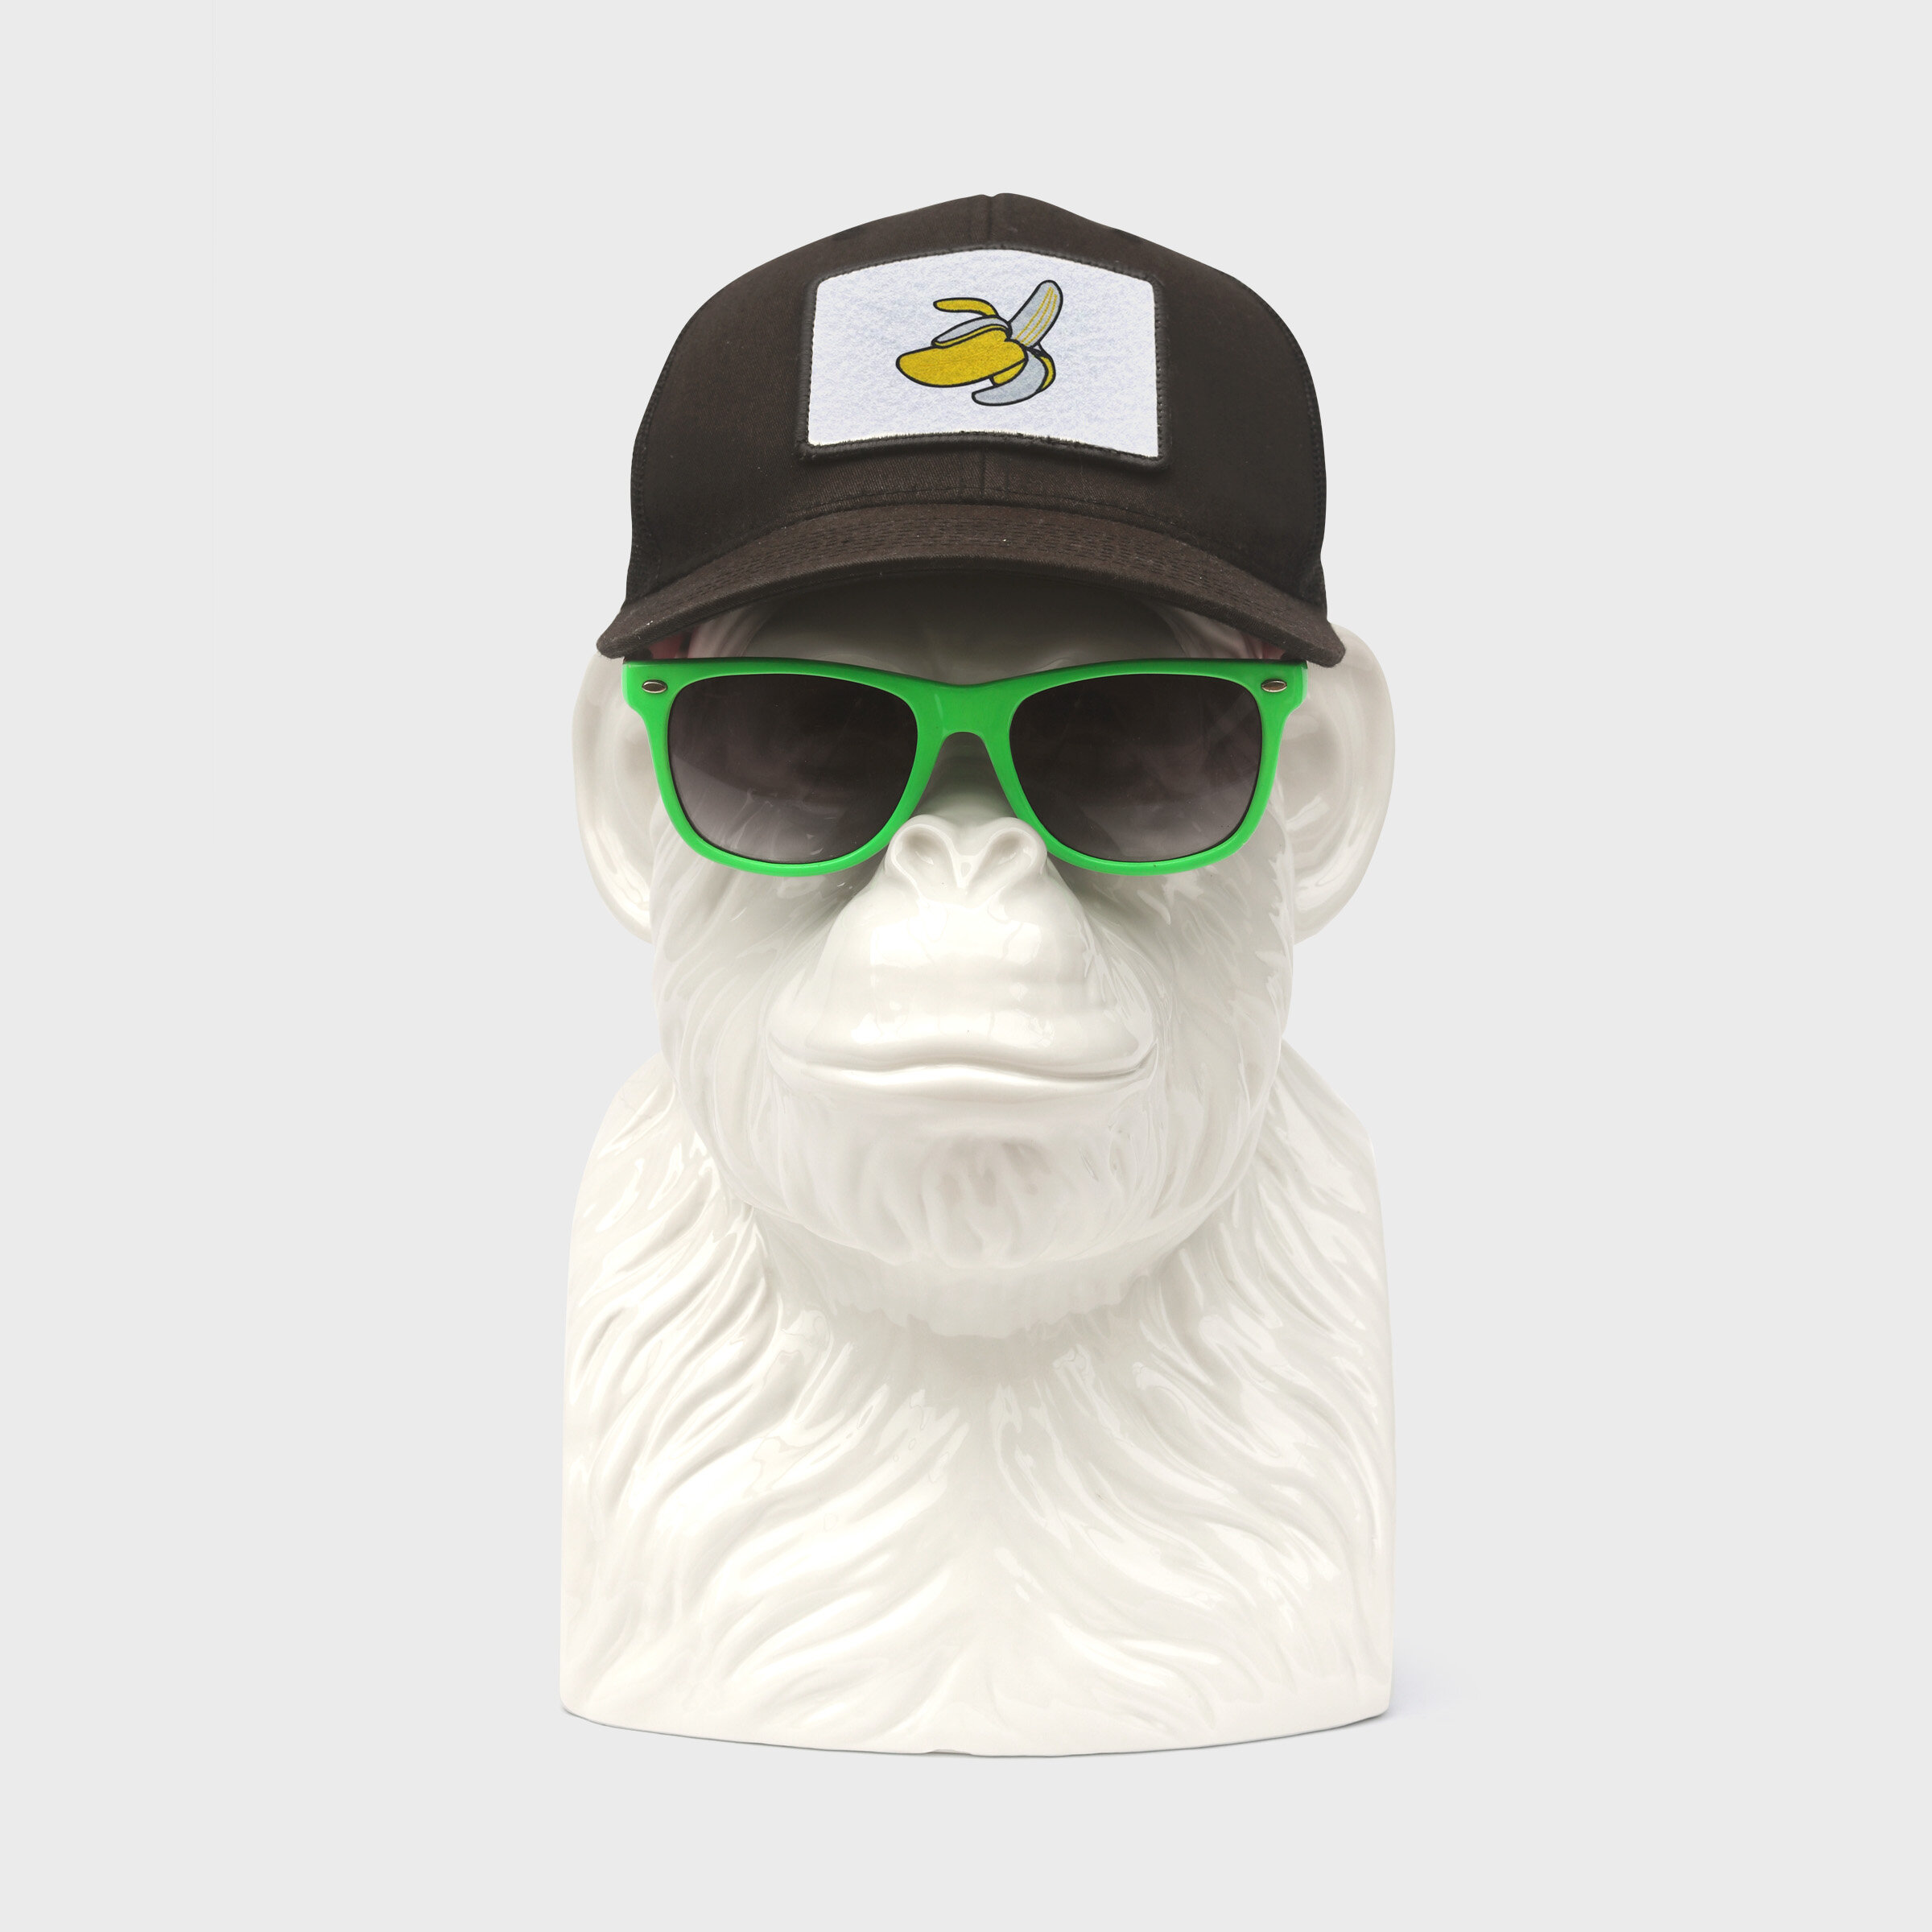 chimp with shades and cap